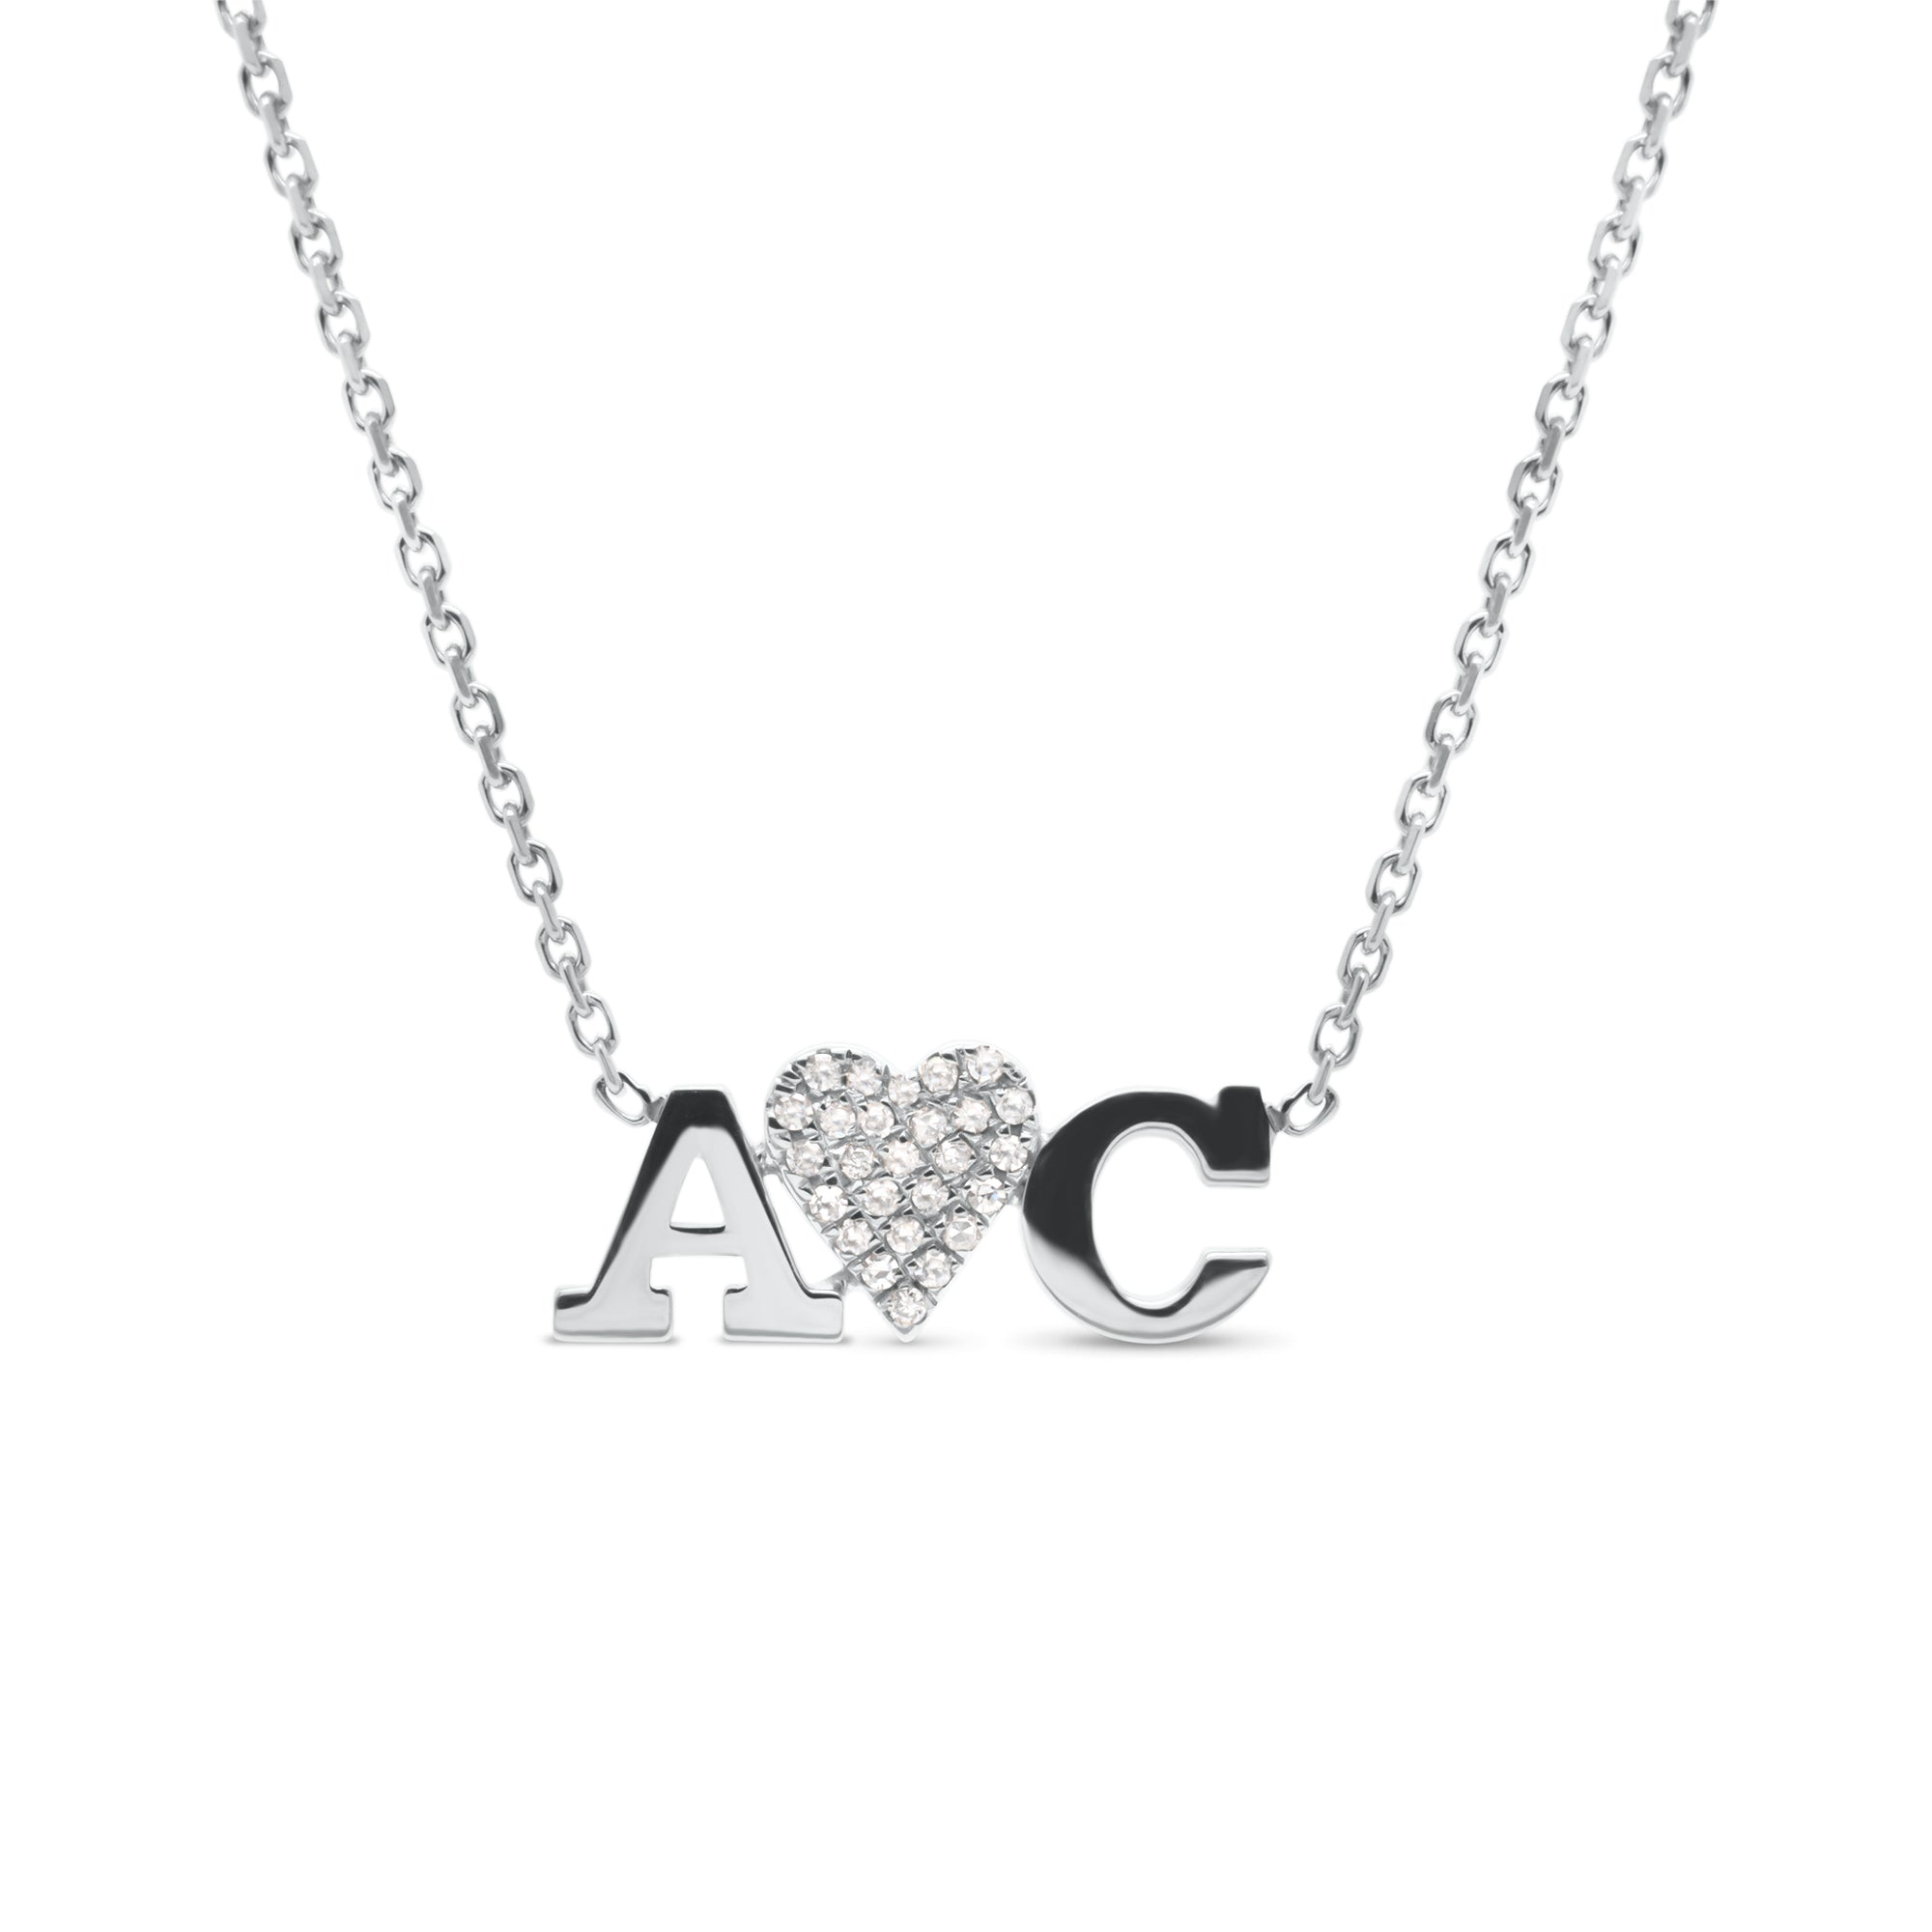 Diamond Initials Love Pendant Necklace - 14K gold weighing 2.10 grams  - 26 round diamonds weighing 0.06 carats